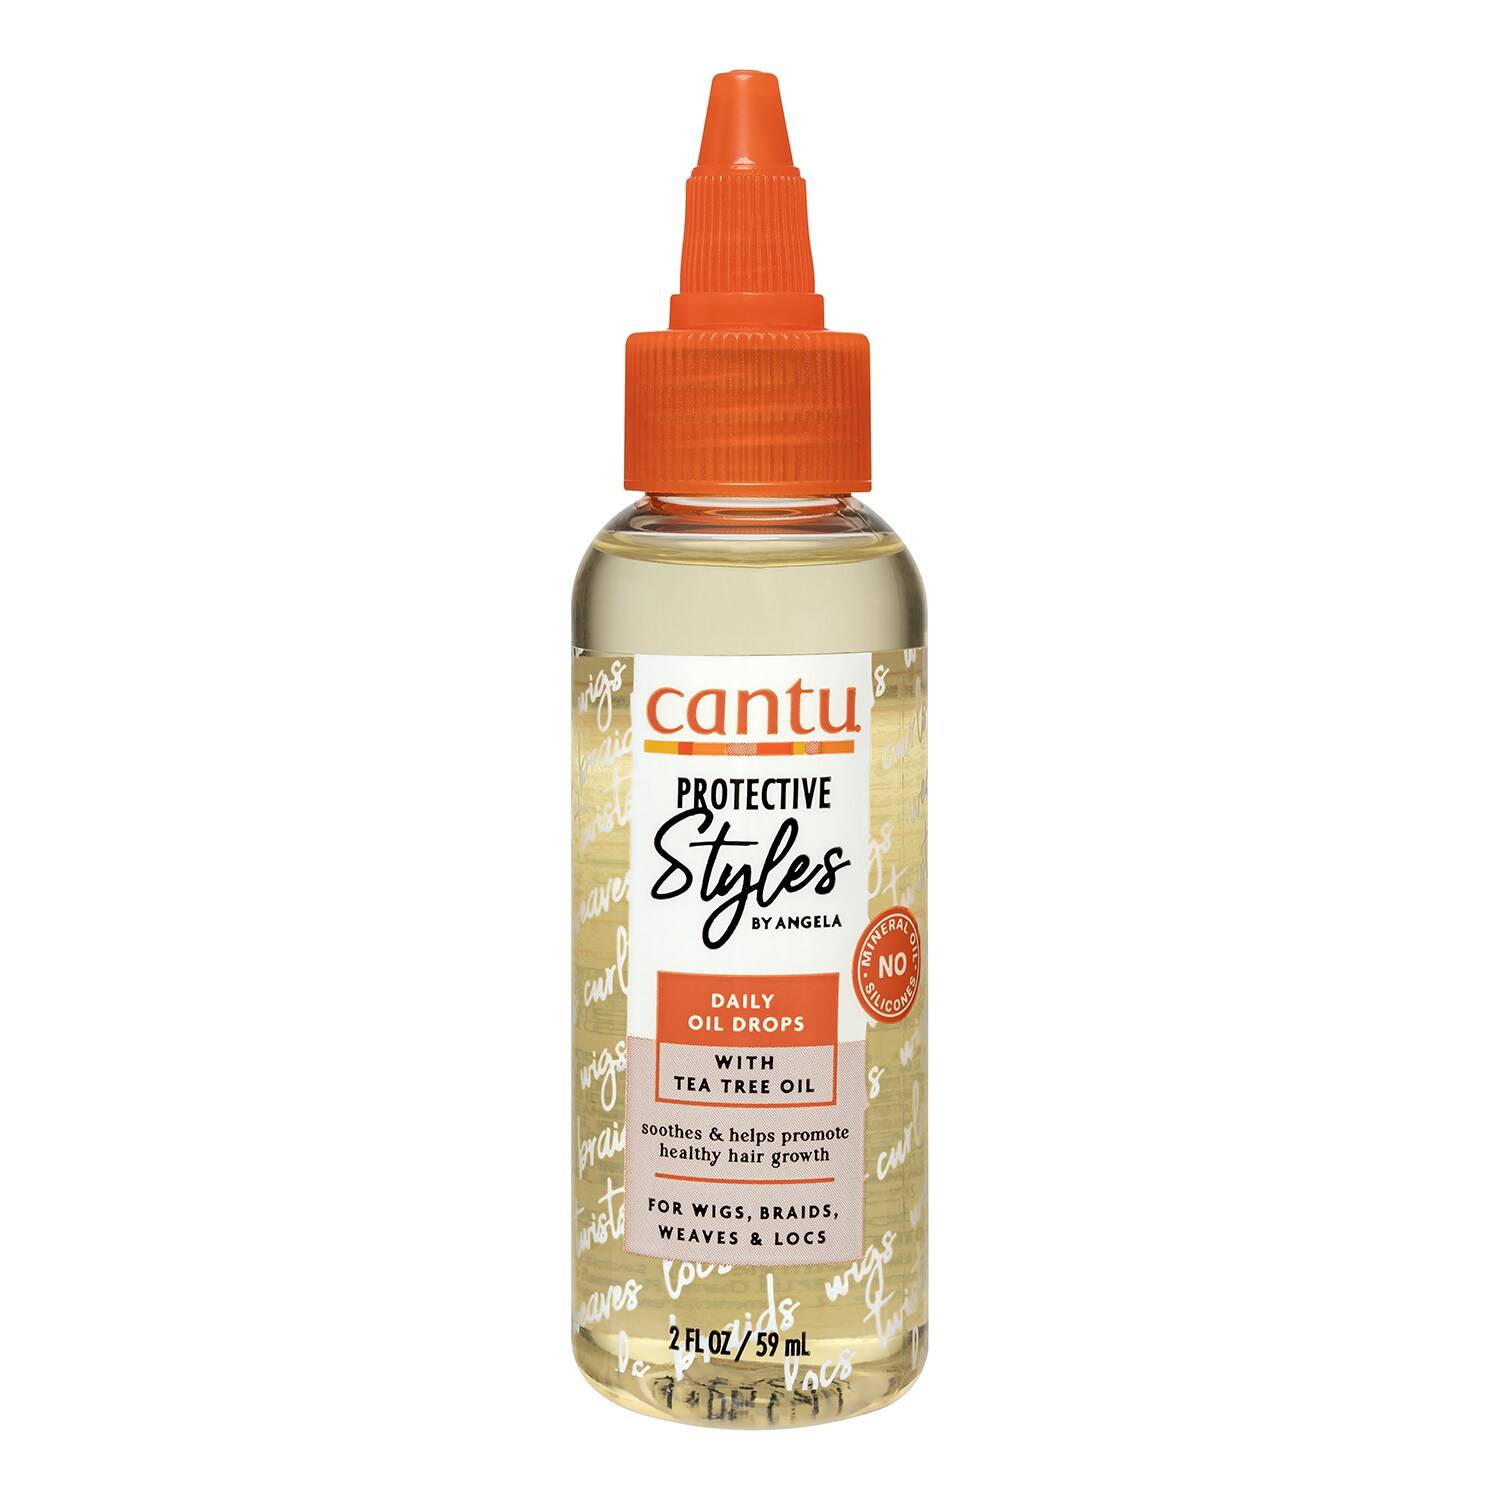 Cantu Protective Styles Daily Oil Drops With Tea Tree Oil 59Ml